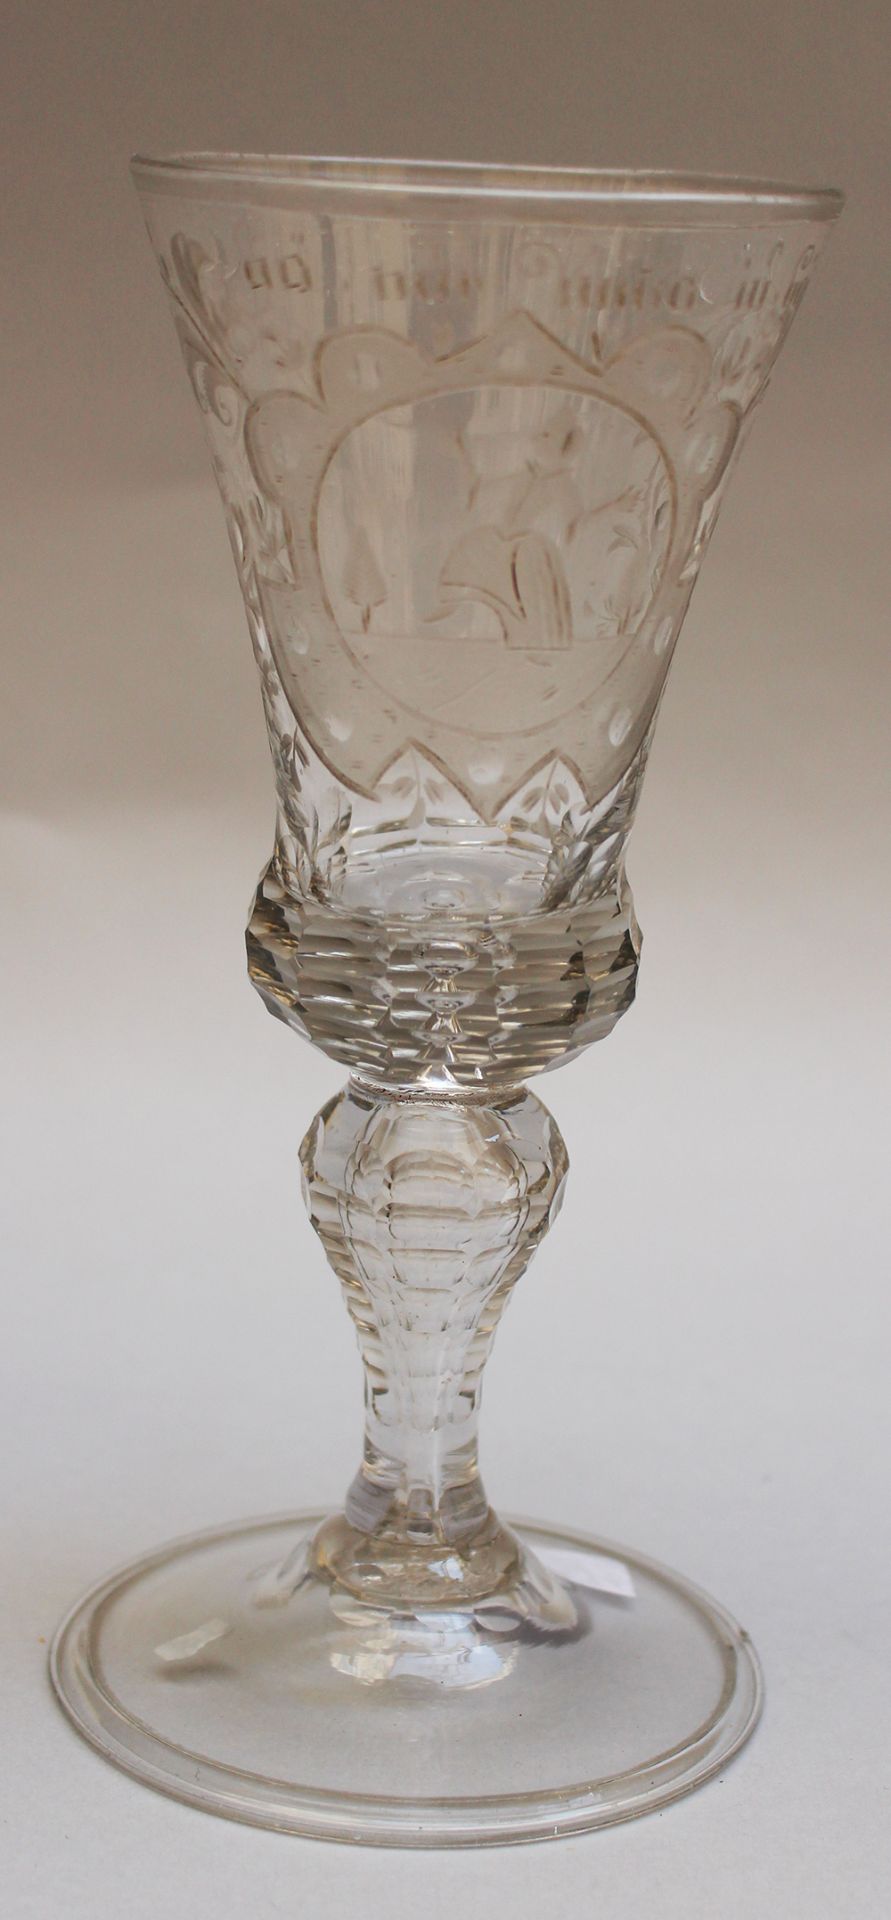 Transparent glass goblet, with one cut and curved central foot, with etched ornament and described “